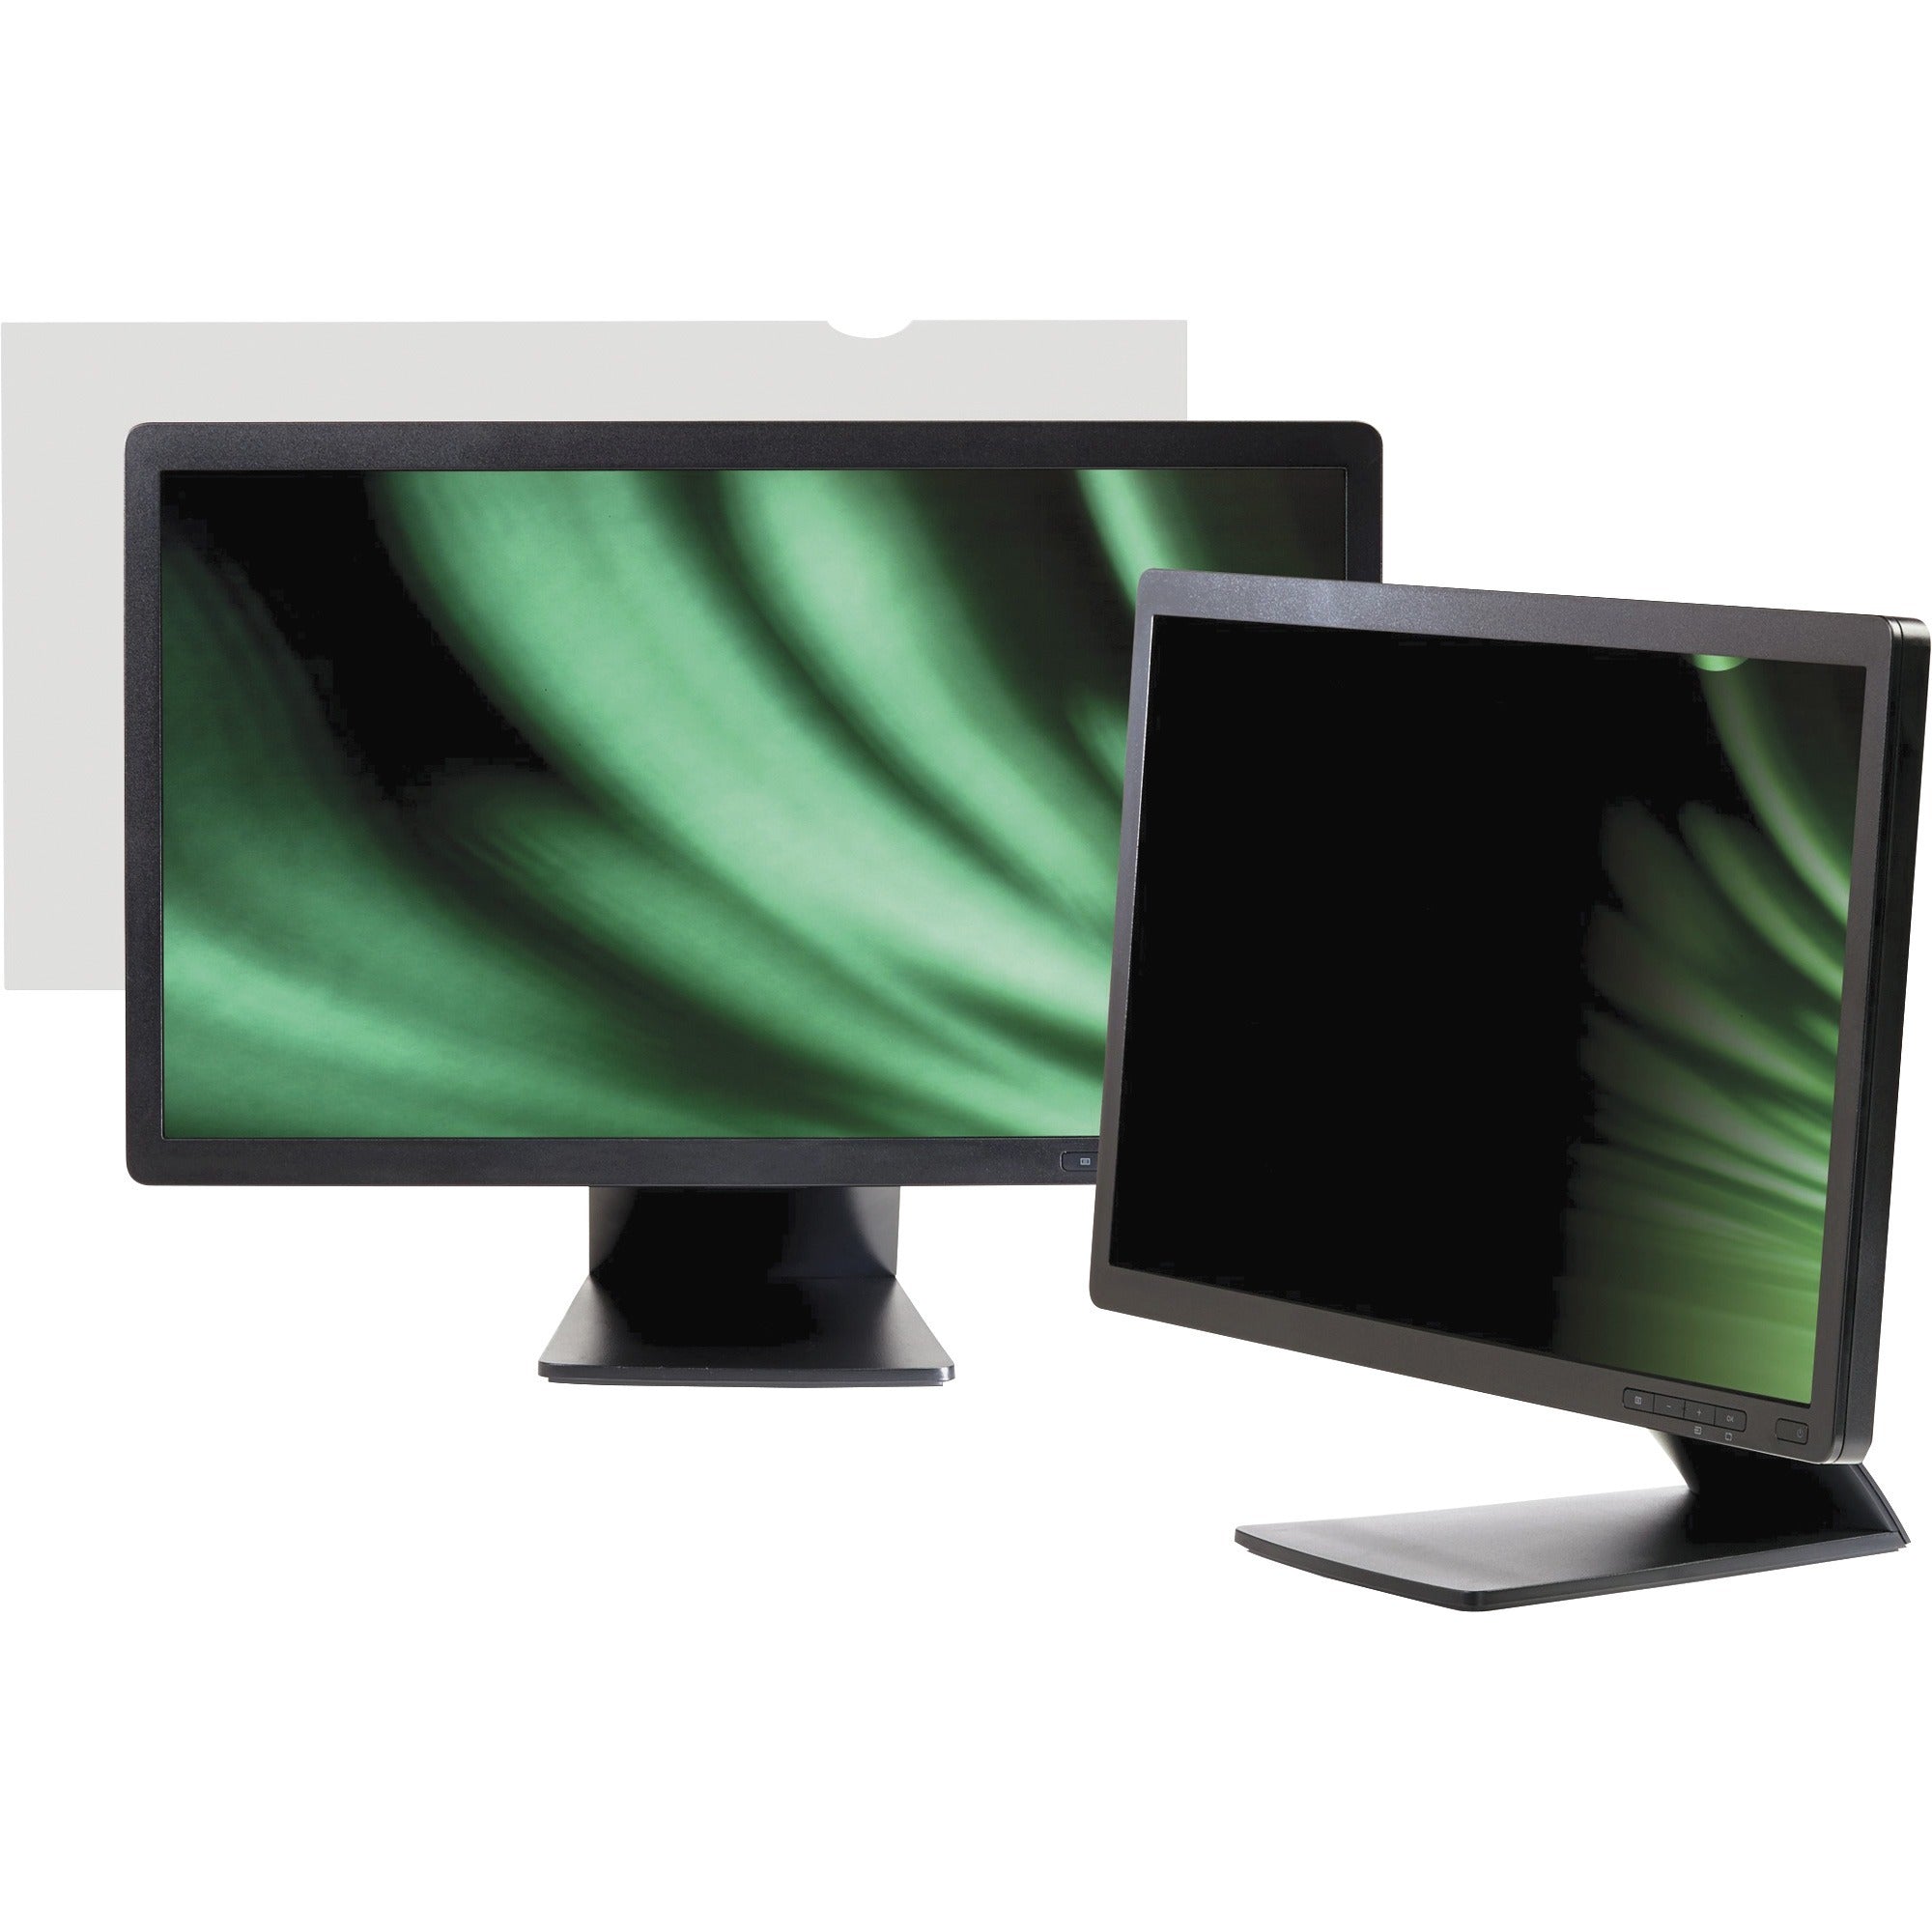 business-source-widescreen-frameless-privacy-filter-black-for-19-widescreen-lcd-monitor-1610-anti-glare-1-pack_bsn59350 - 1